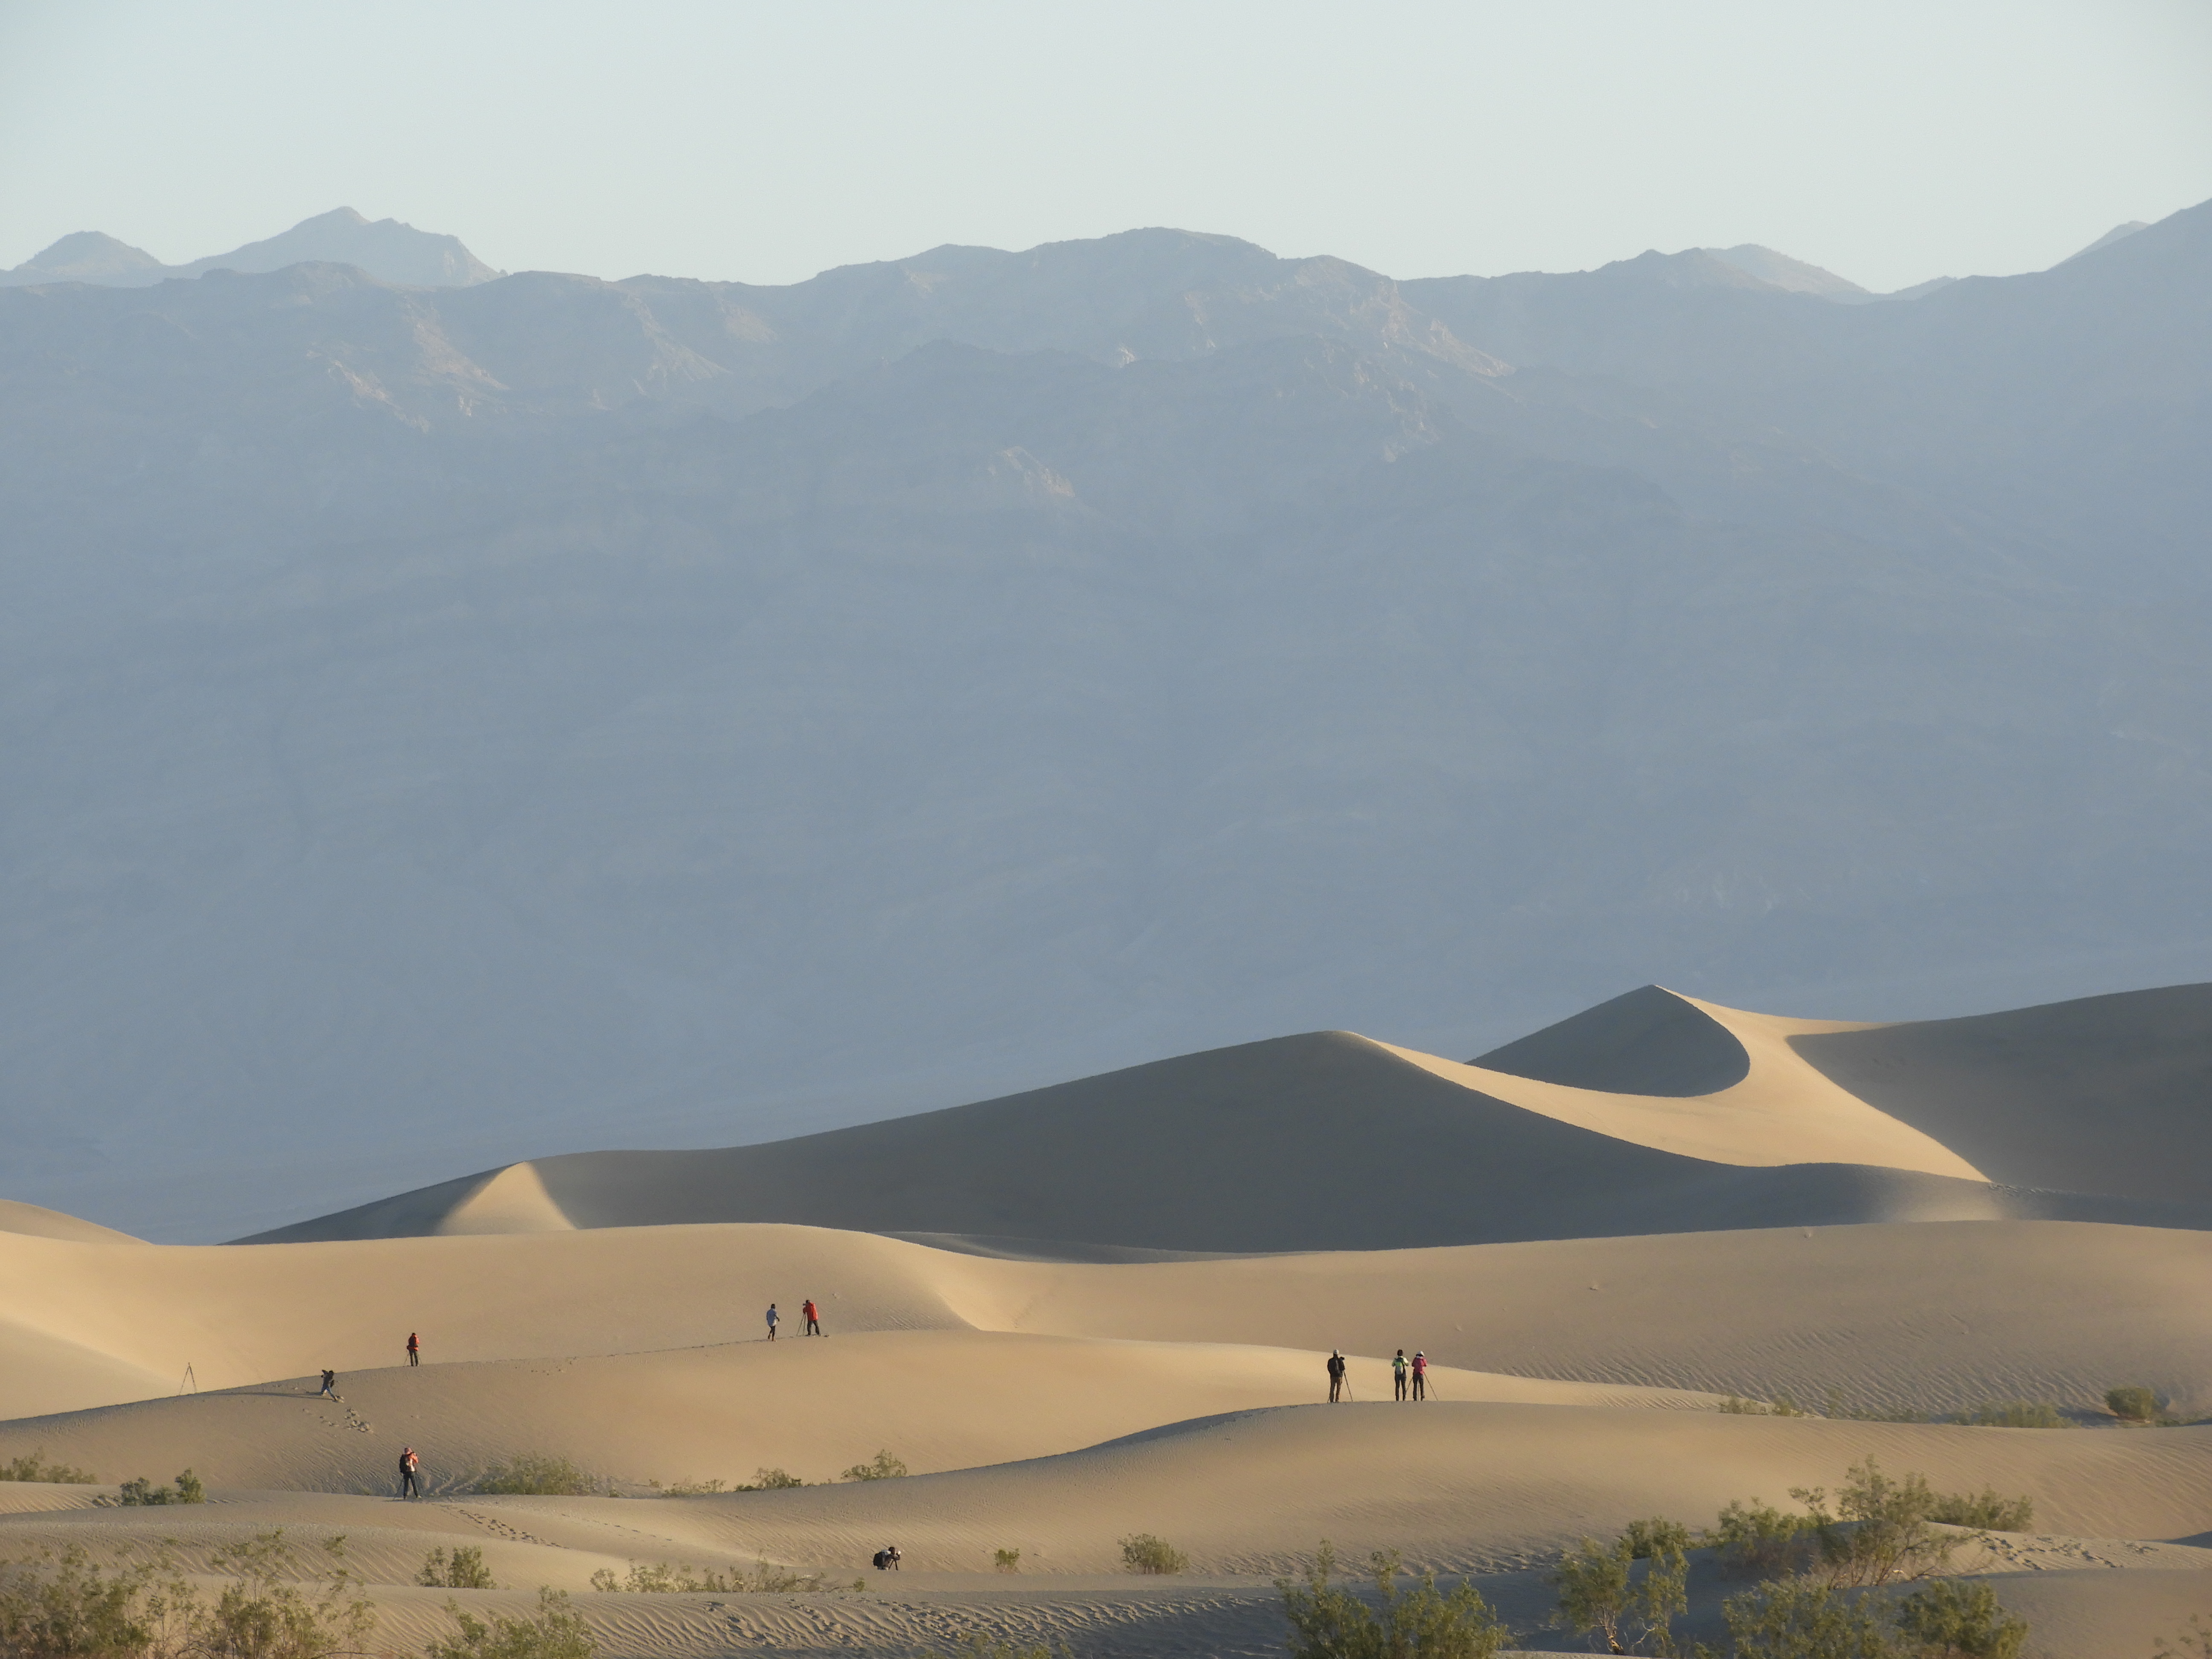 Mesquite Sand Dunes in Death Valley National Park in southeastern California